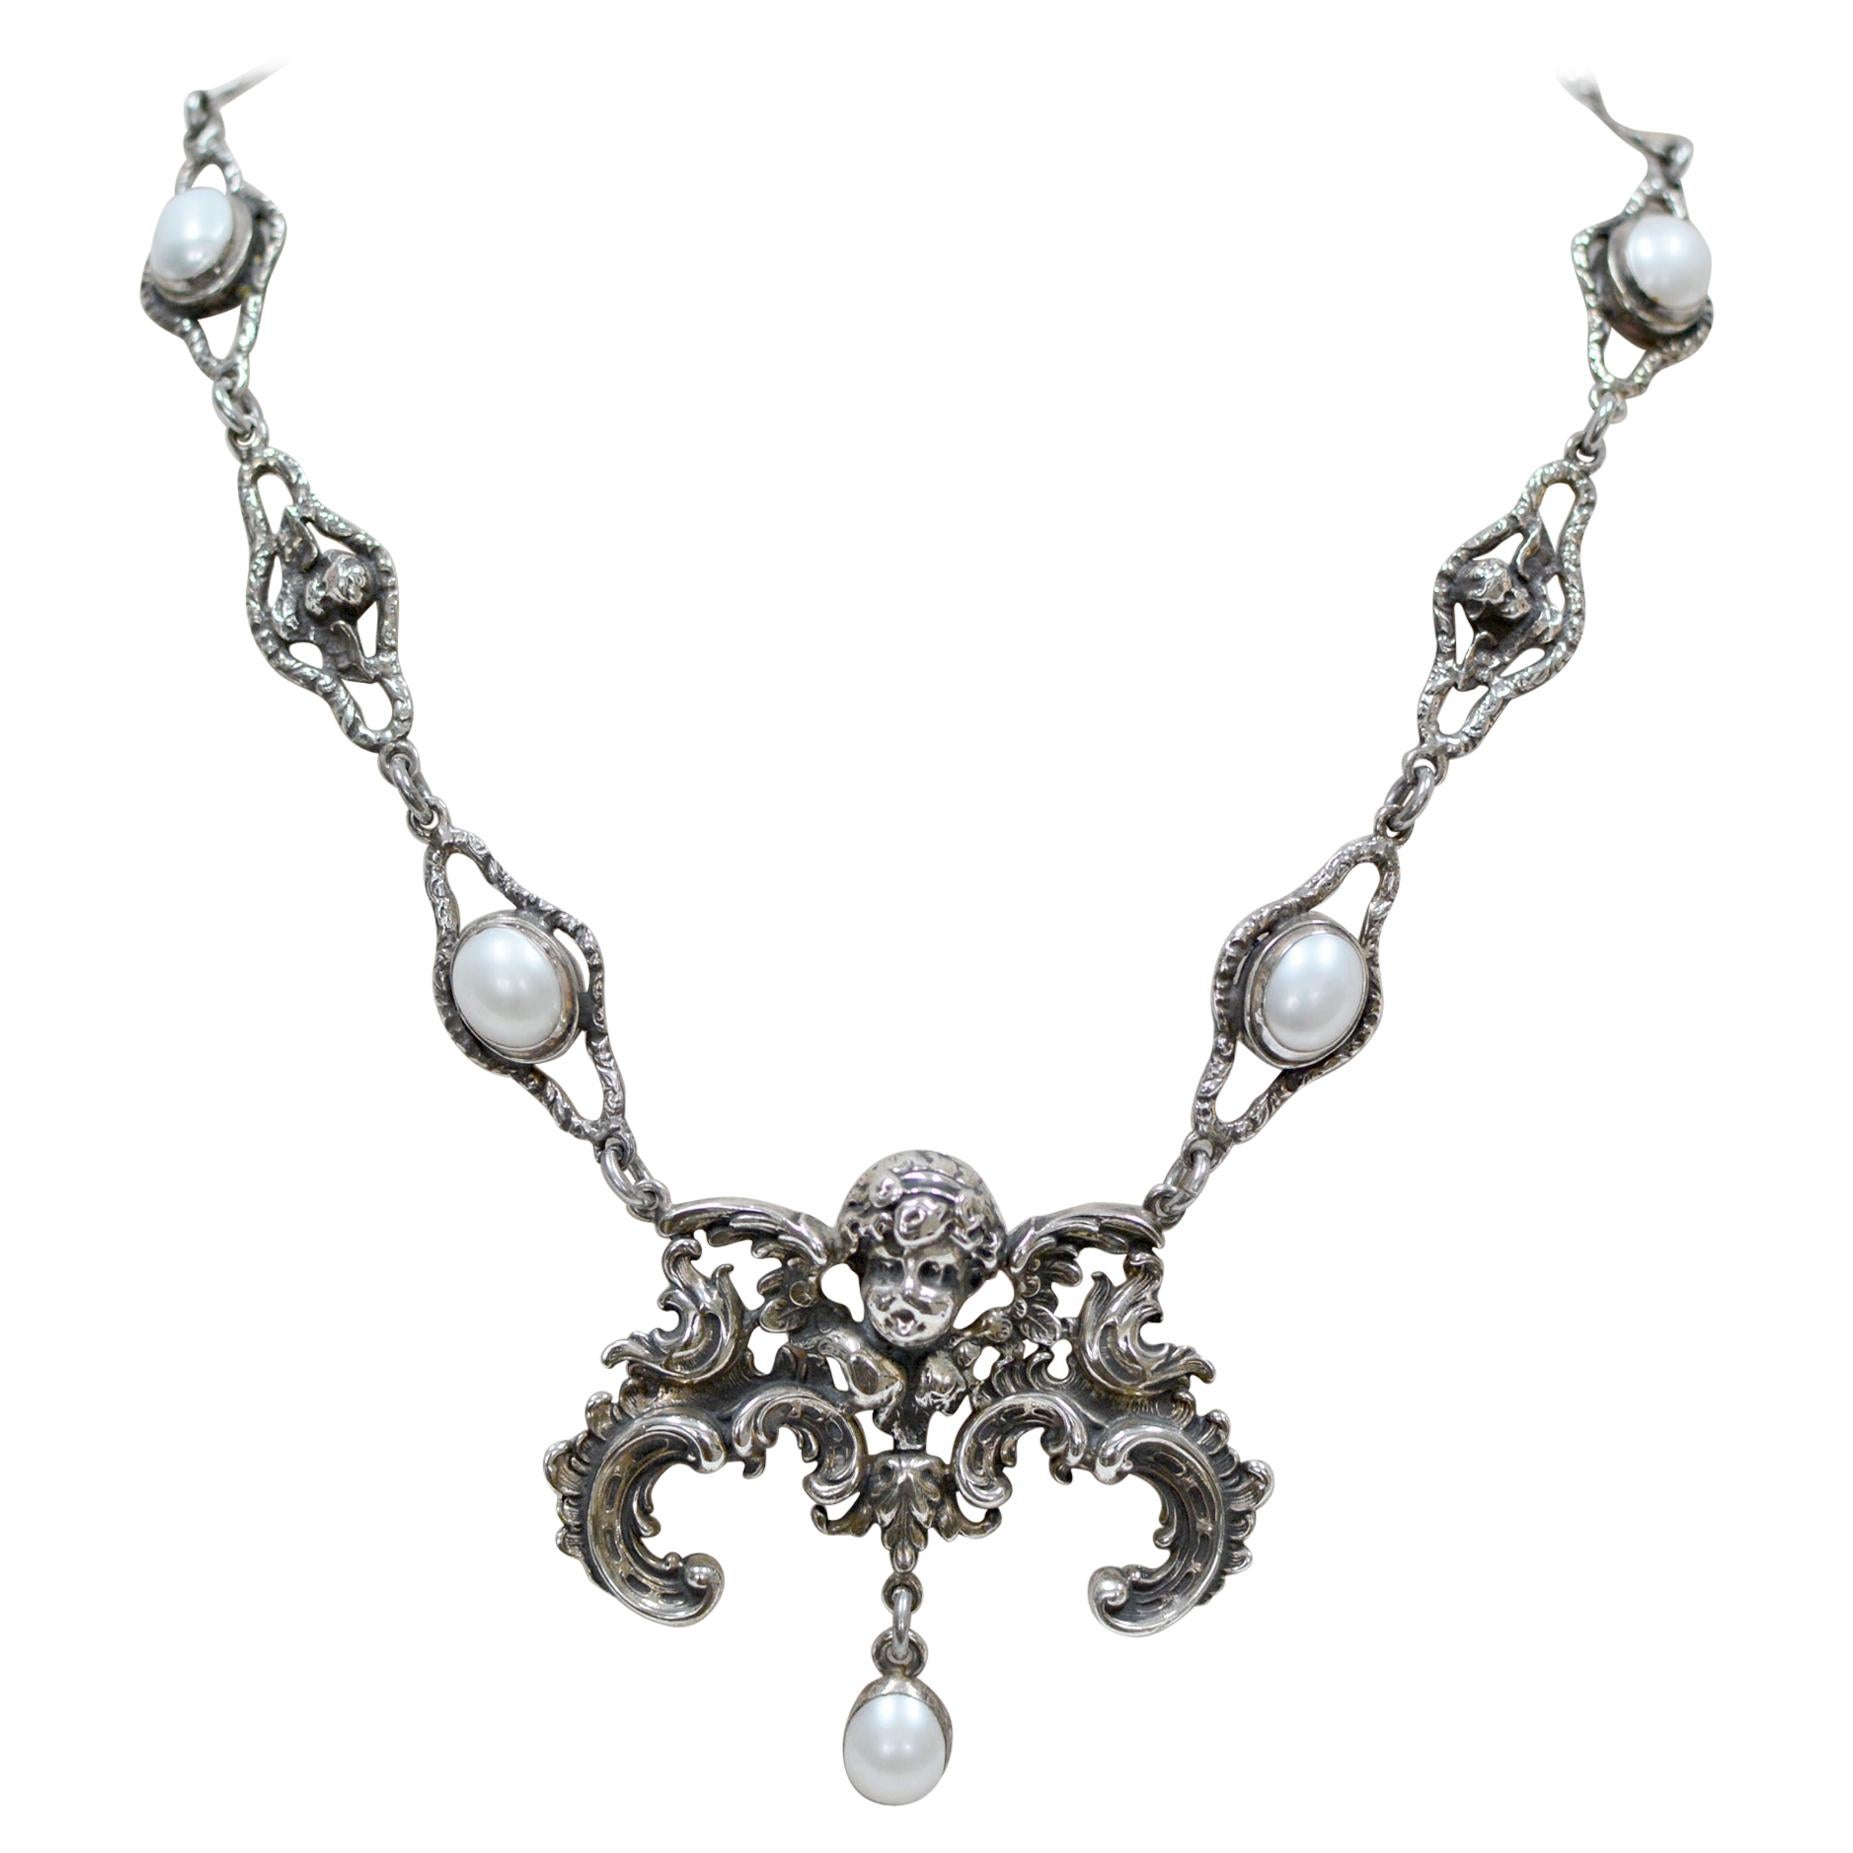 Jill Garber Necklace with Baroque Angel and Freshwater Pearls